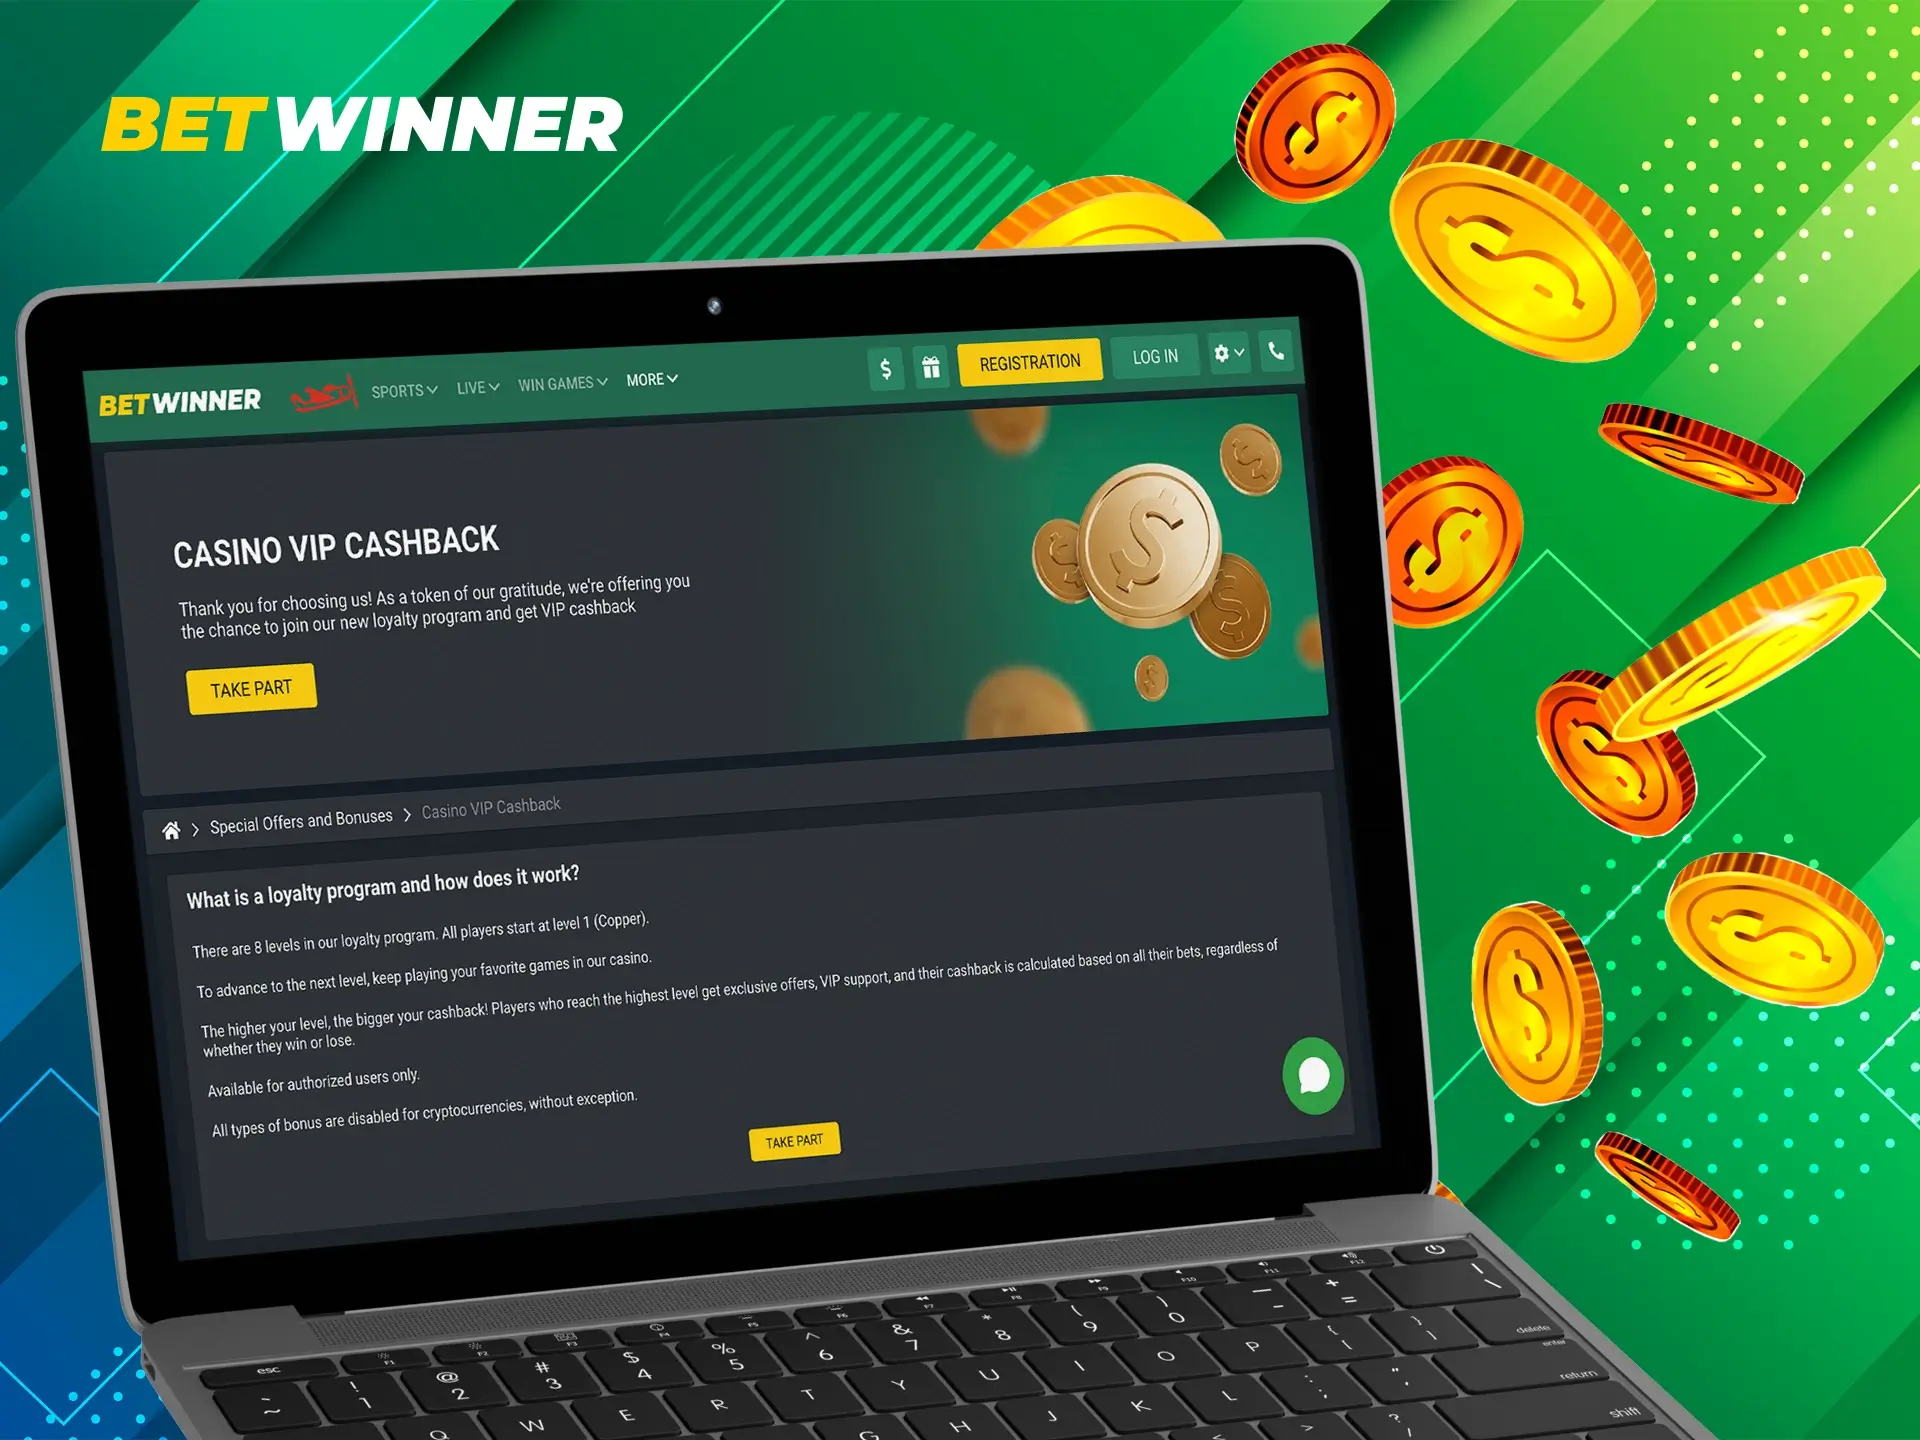 Fund your account, actively participate in games and bets and you'll get a dizzying cashback.